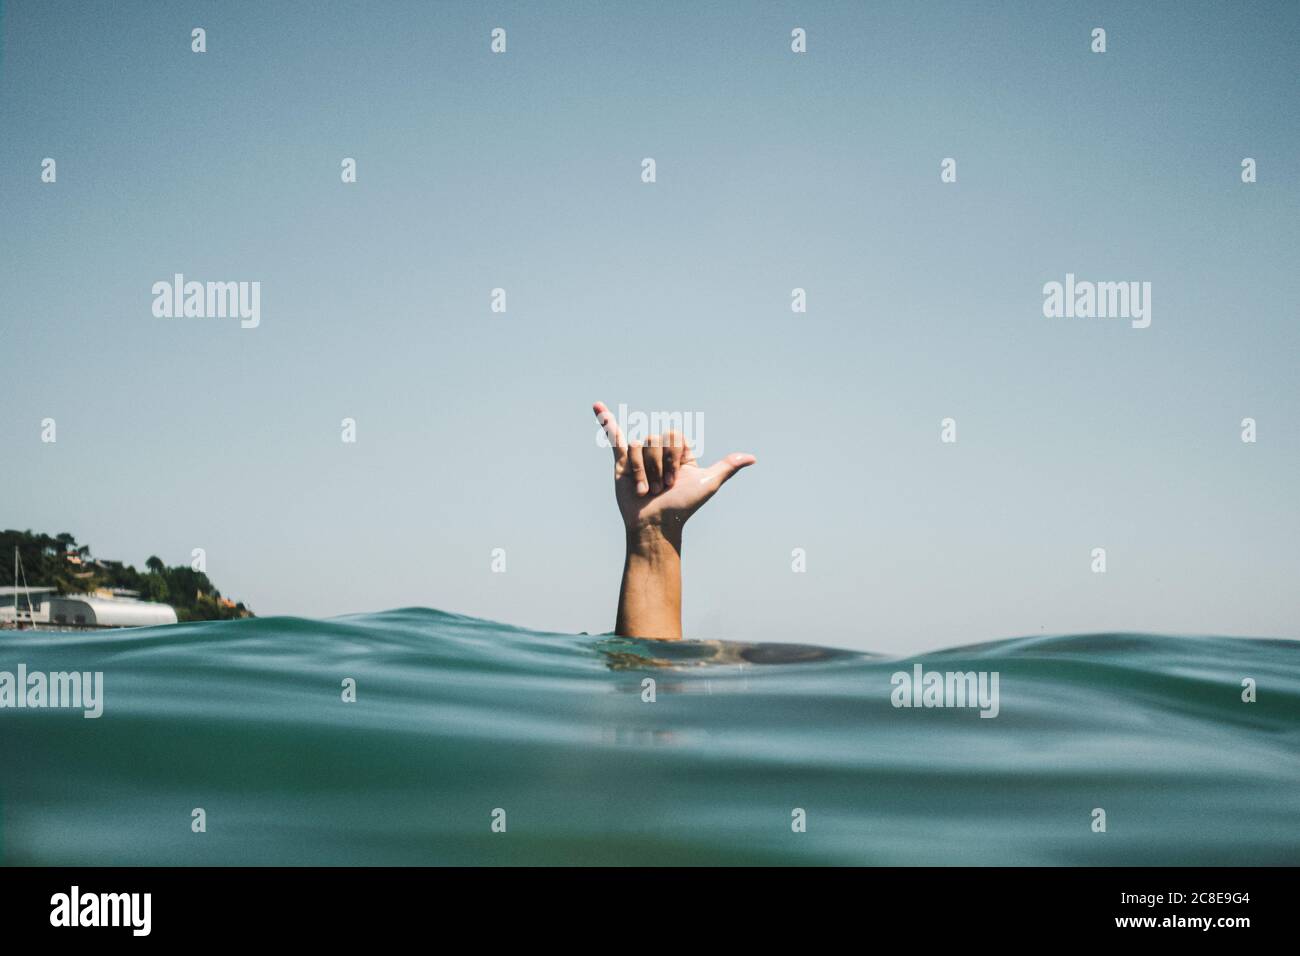 Womans hand making surfer's sign in water Stock Photo